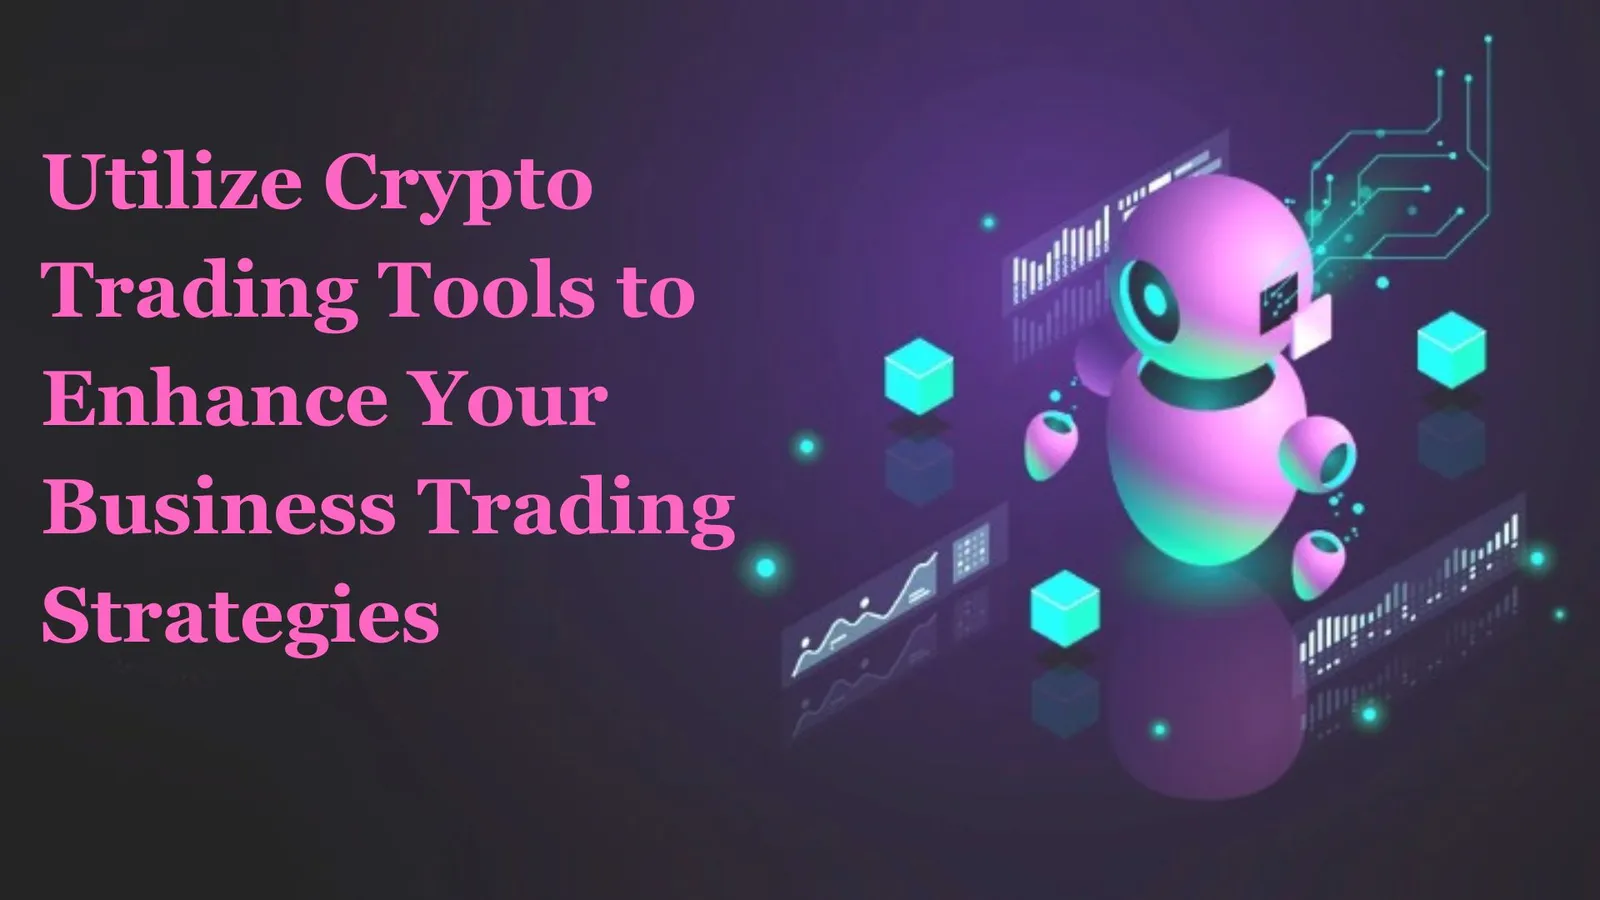 In What Way Businesses Can Utilize Crypto Trading Tools to Enhance Their Trading Strategie